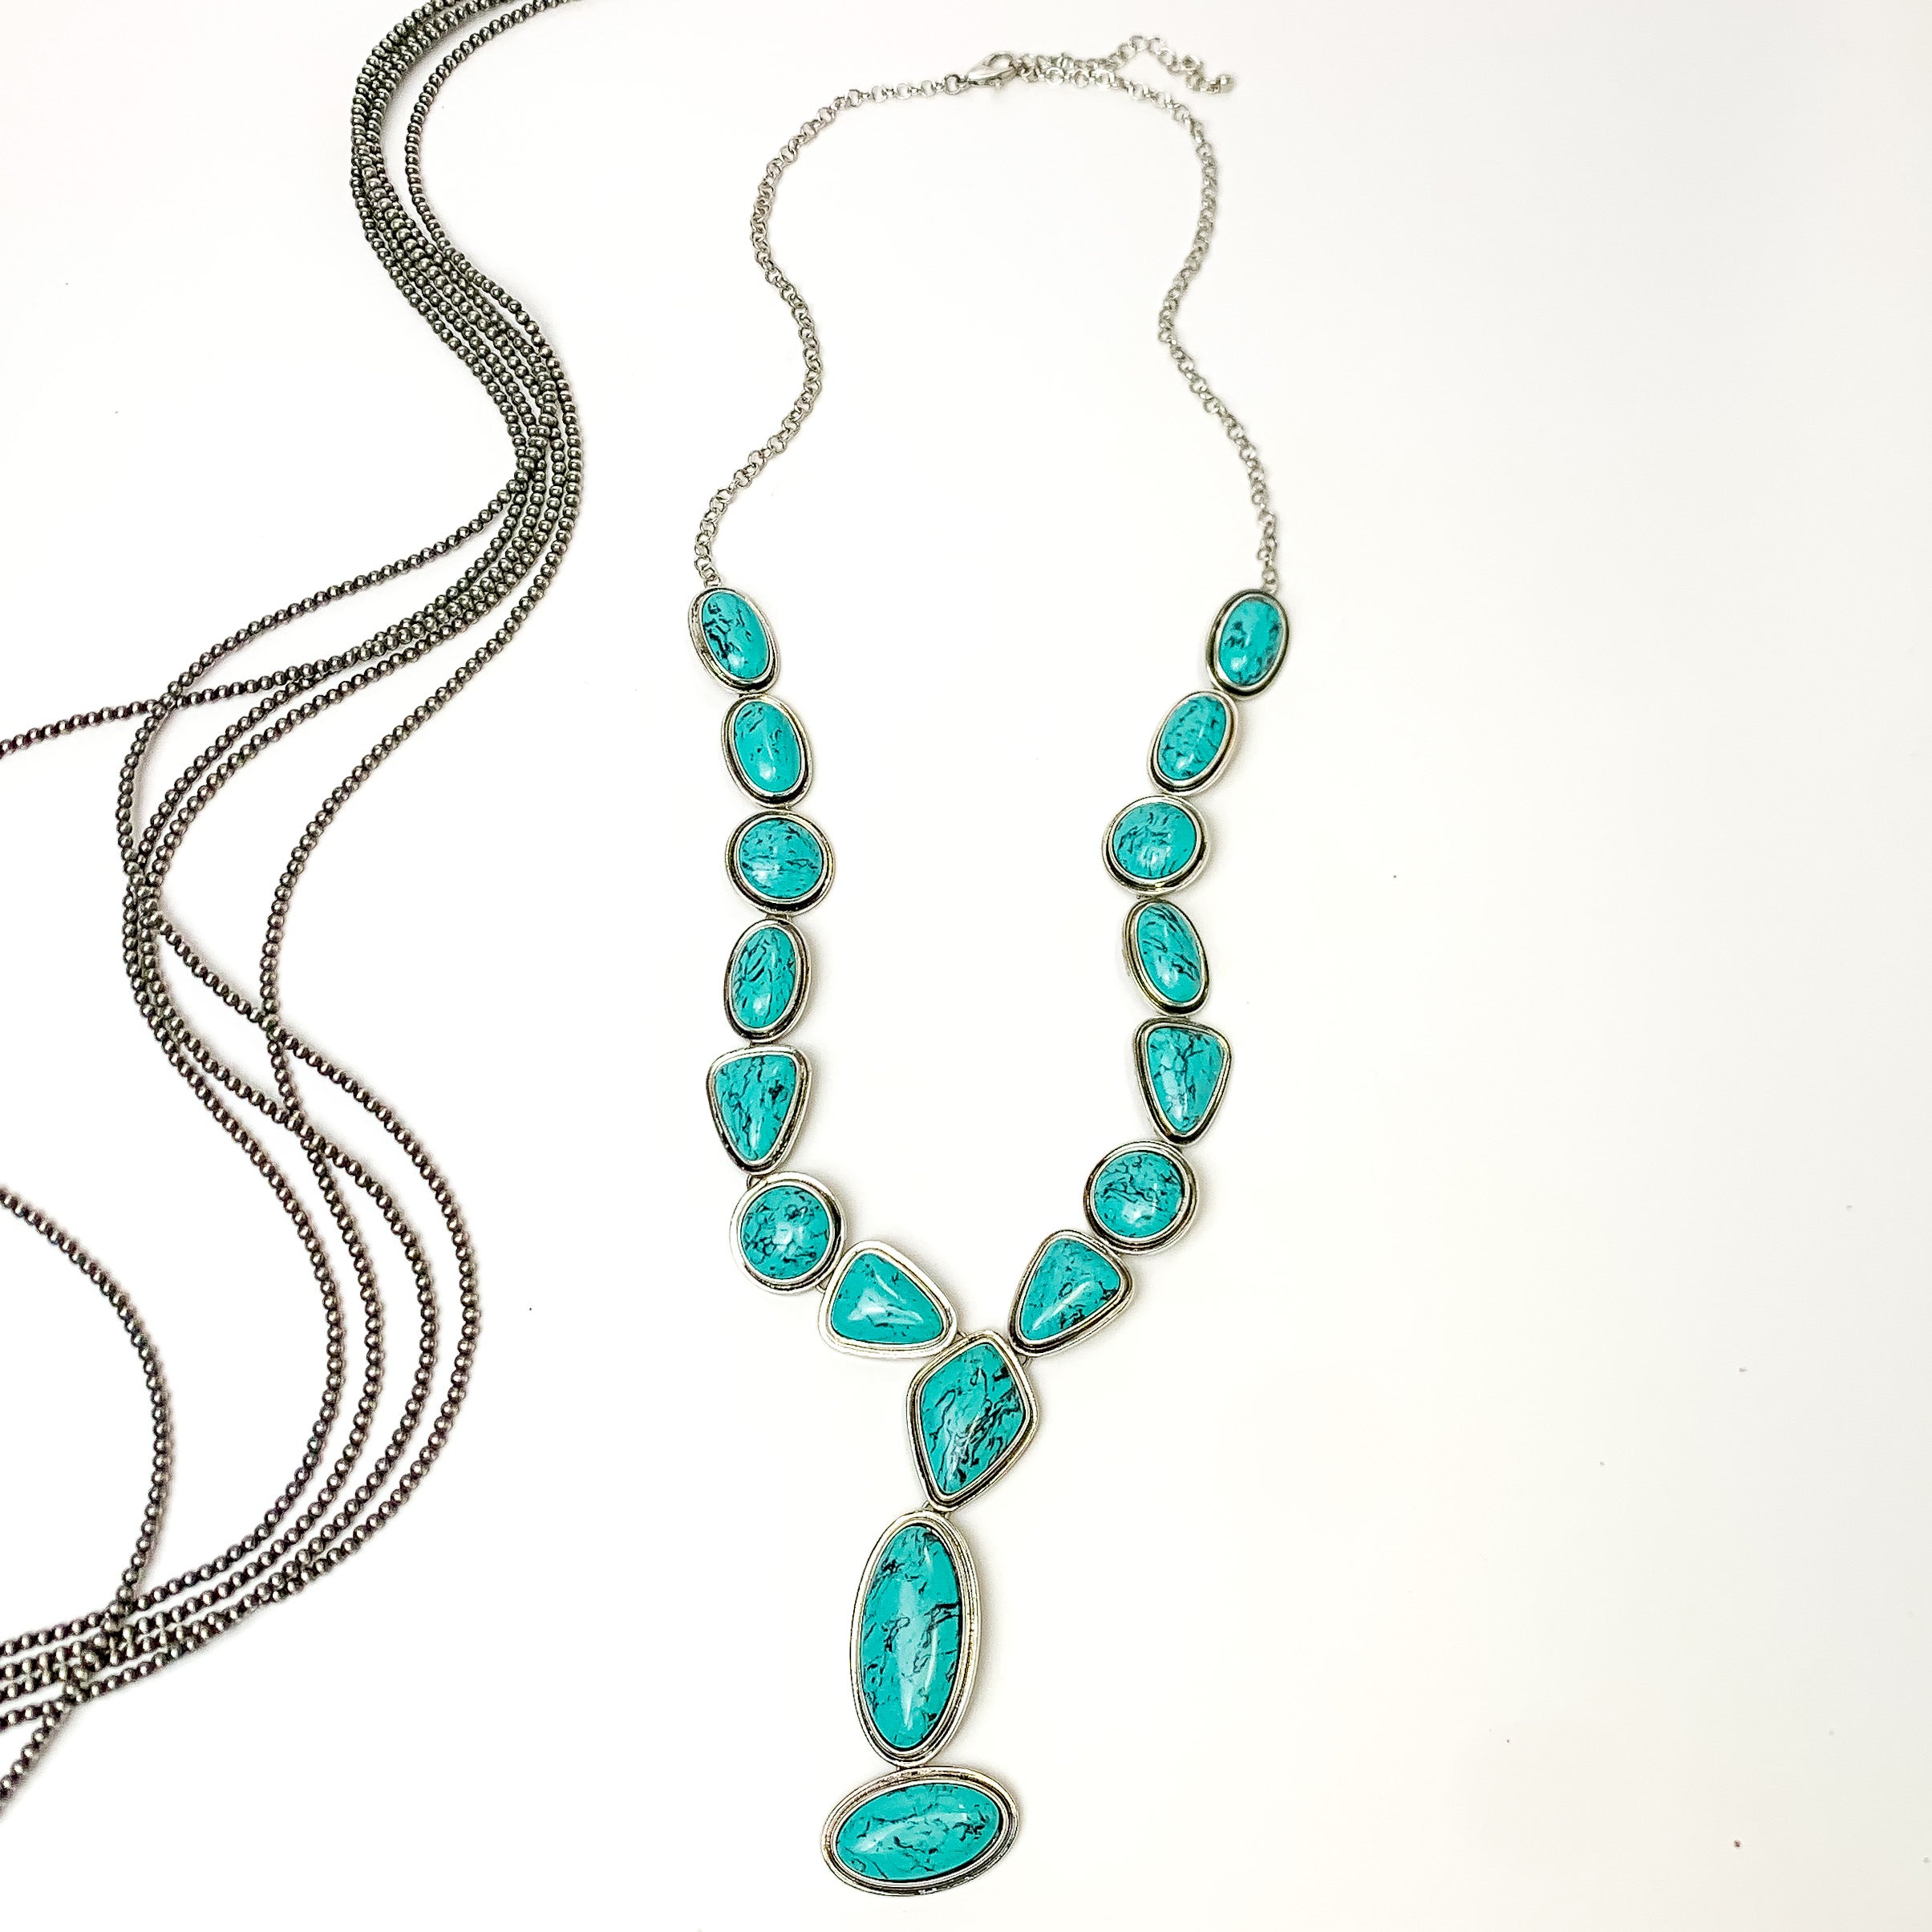 Multi stoned long necklace in turquoise with a dangling turquoise stones. Pictured on a white background with Navajo pearl stands.